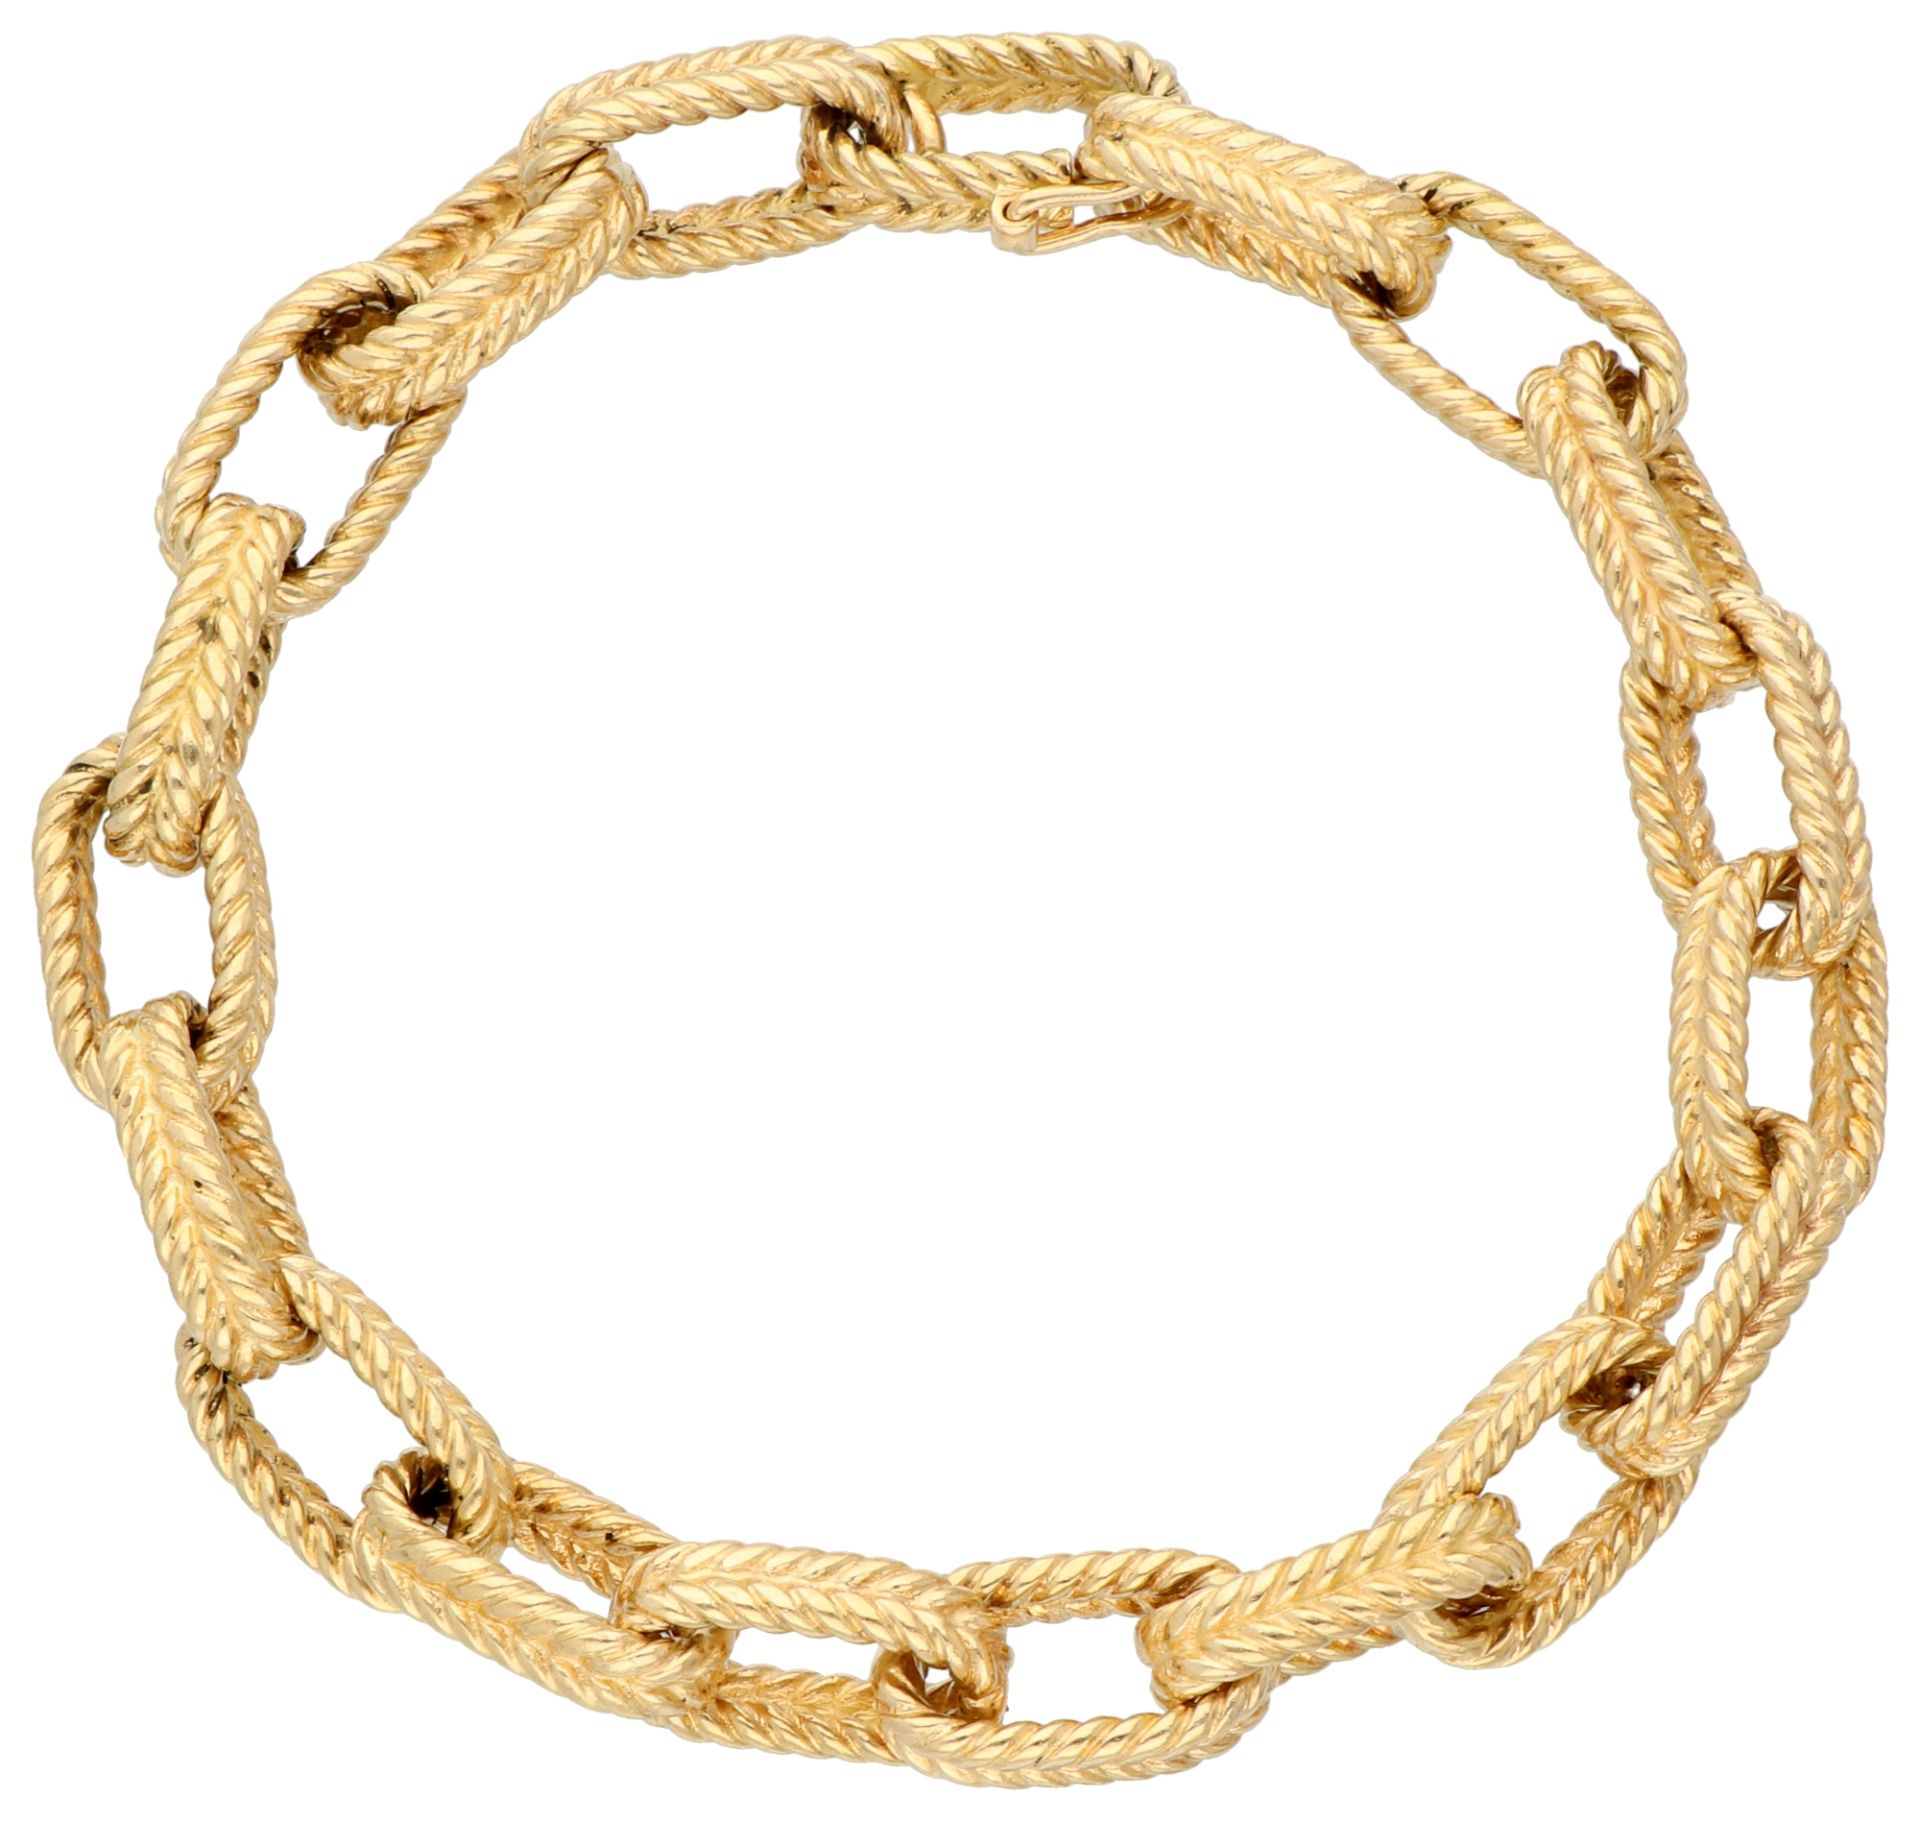 18K Yellow gold anchor link bracelet with braided details. - Image 2 of 3